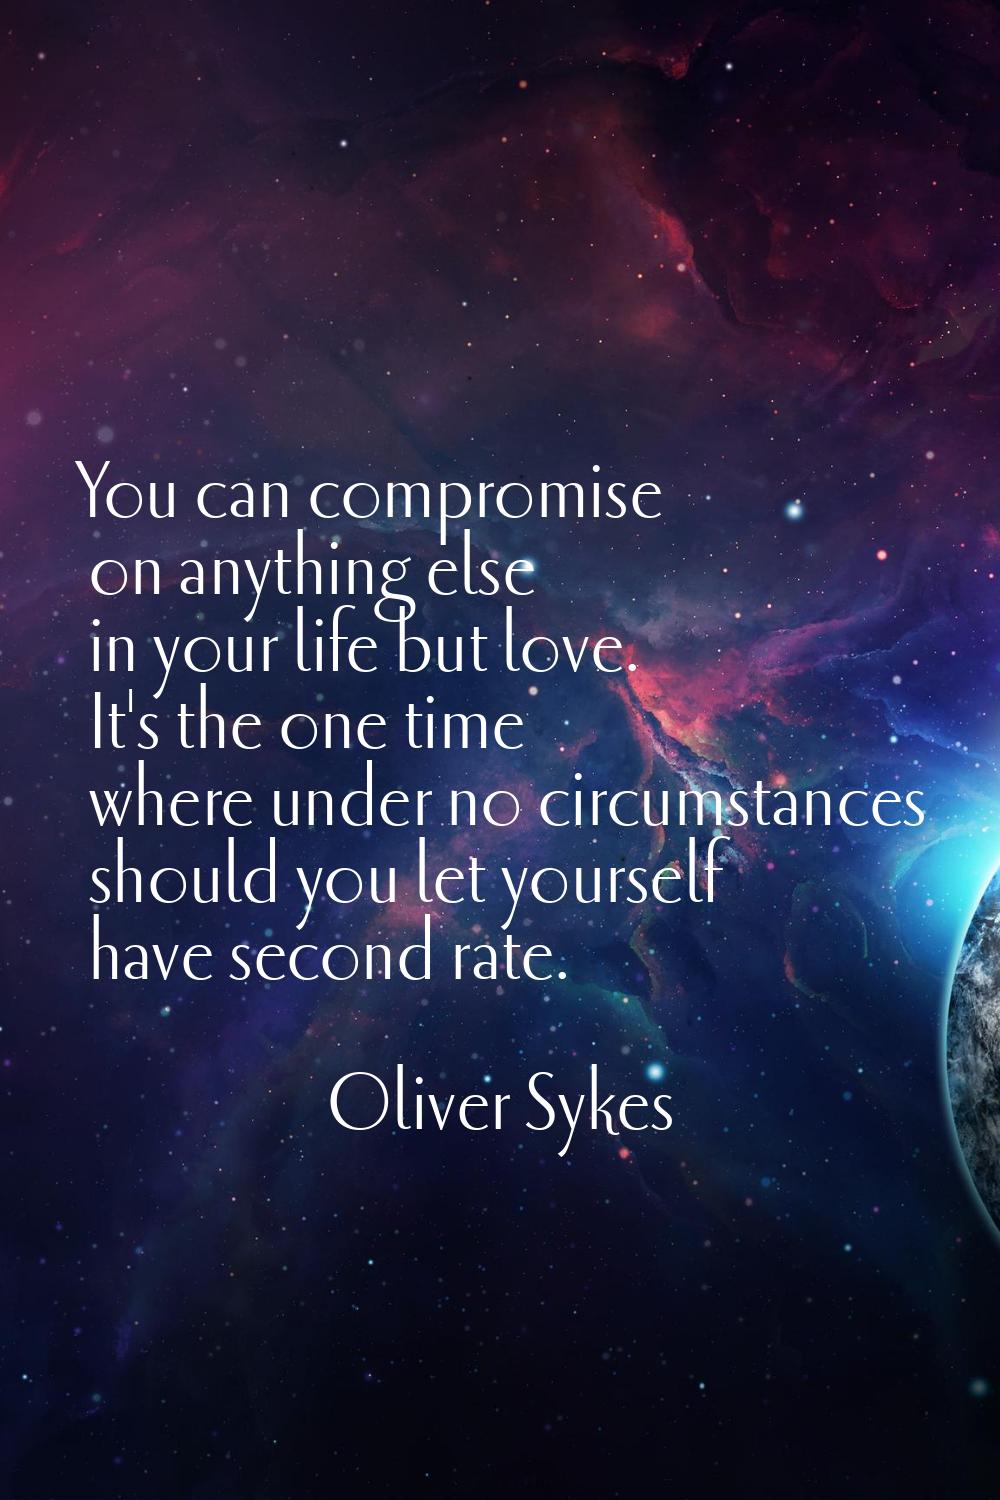 You can compromise on anything else in your life but love. It's the one time where under no circums